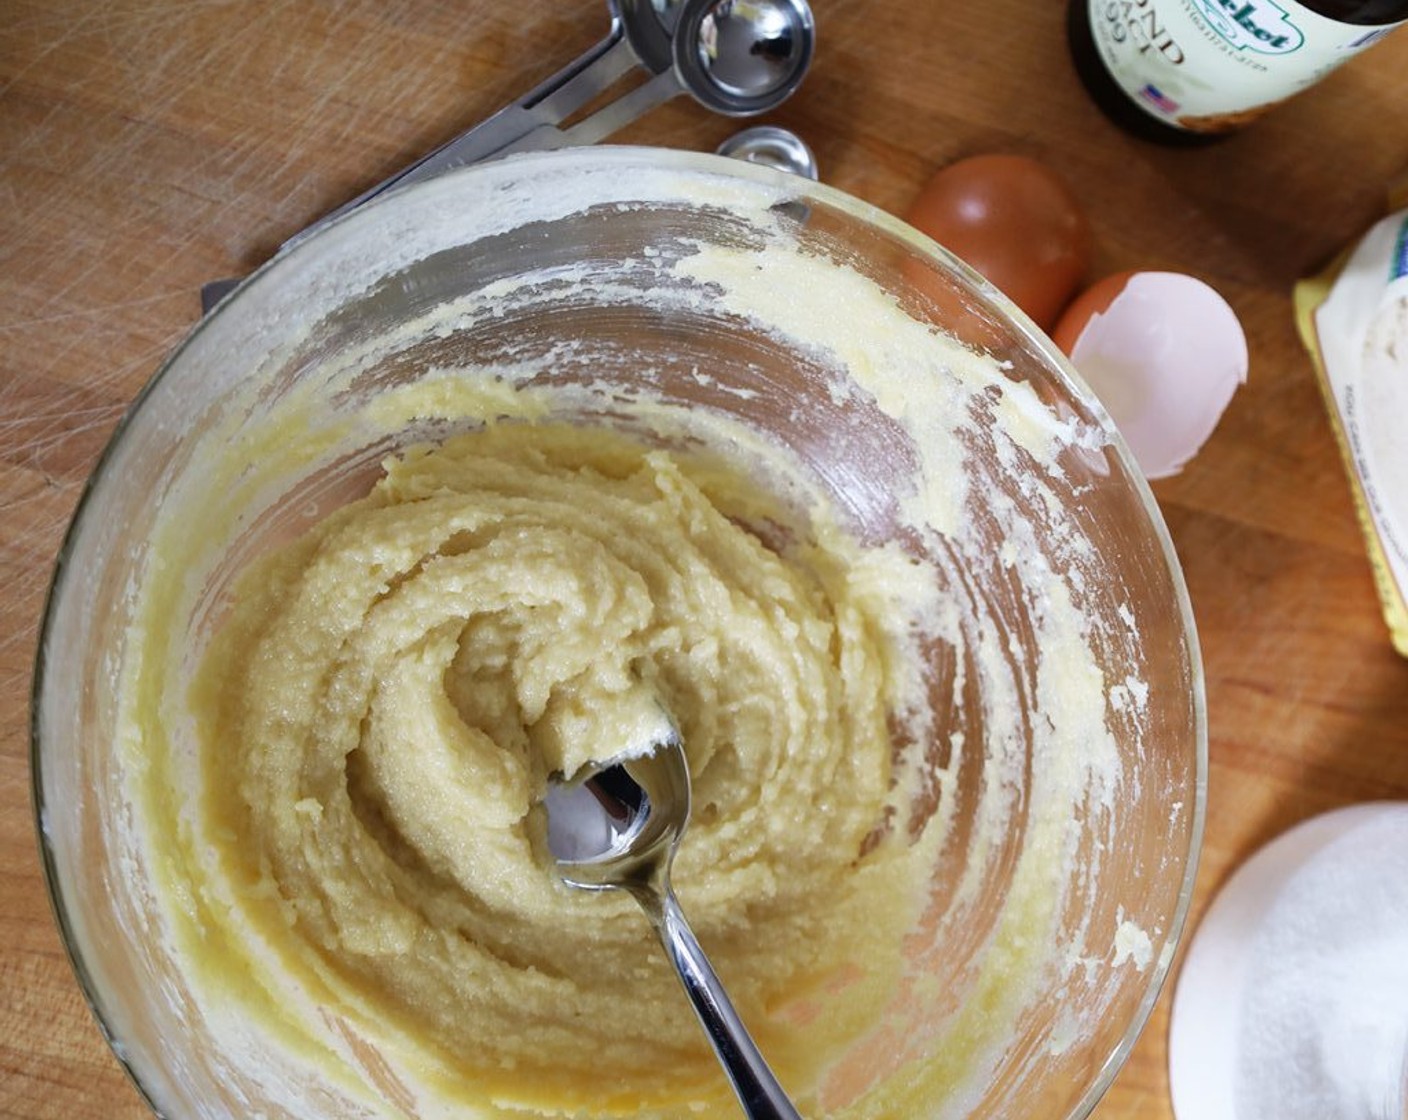 step 6 In a small bowl, whisk together the All-Purpose Flour (1 cup), Baking Powder (1 tsp), and Kosher Salt (3/4 tsp). With the mixer on low, gradually add the dry ingredients to the wet ingredients and mix until just combined.